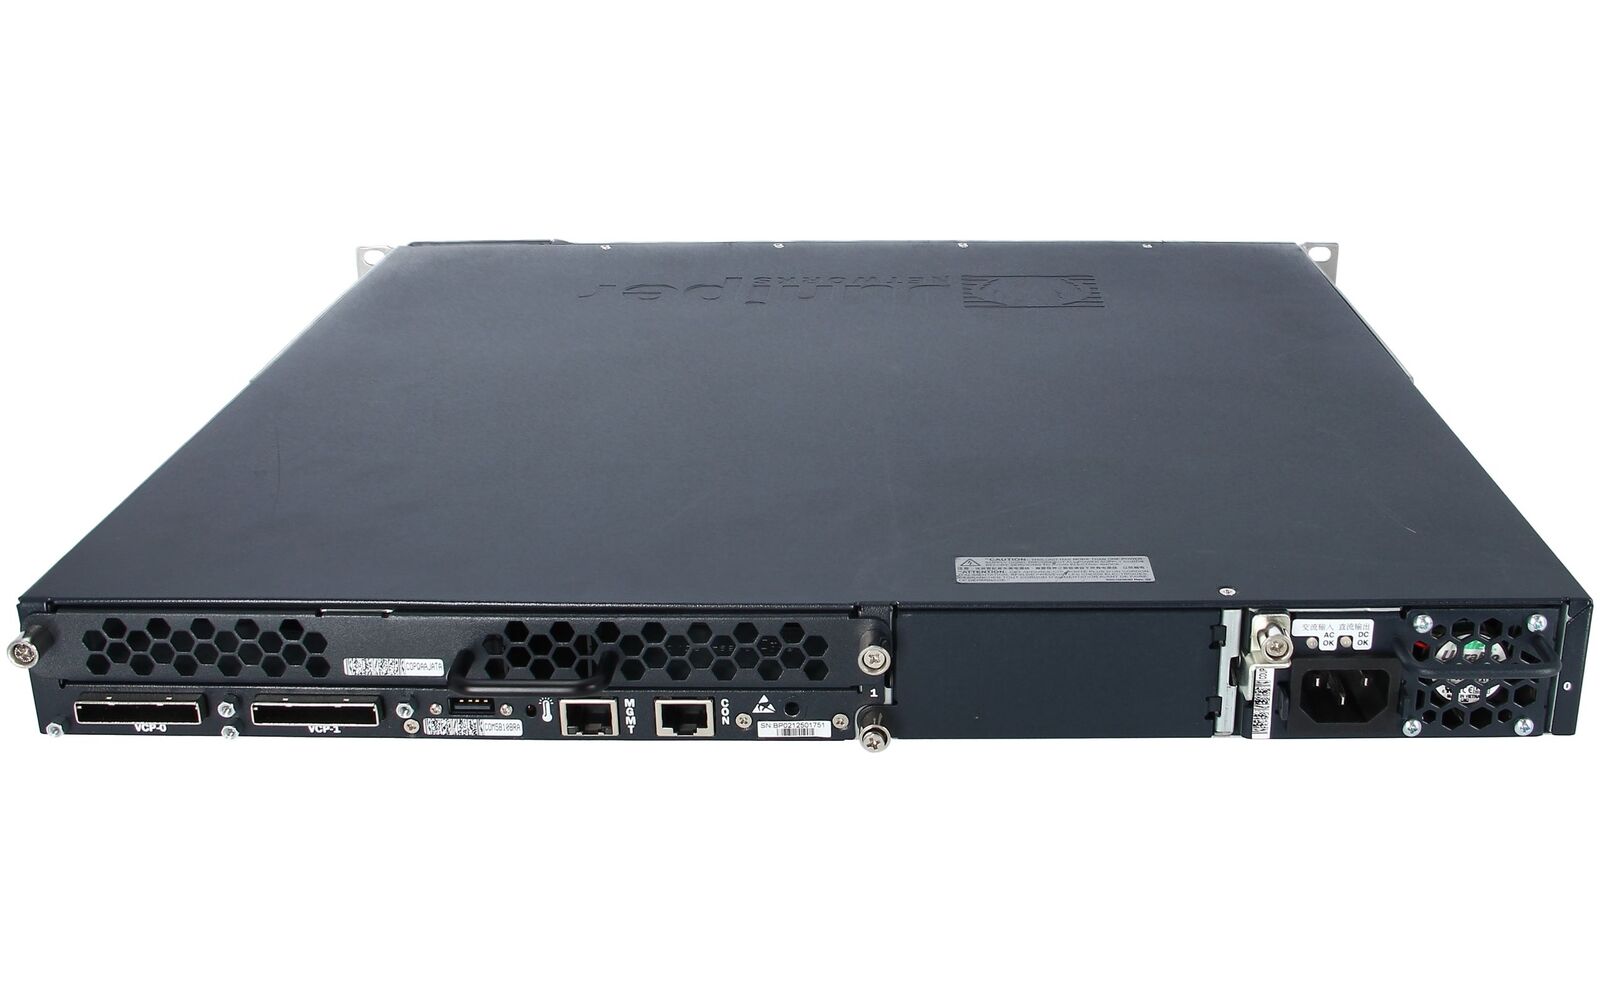 JUNIPER EX4200 48-PORT ETHERNET SWITCH WITH DUAL AC